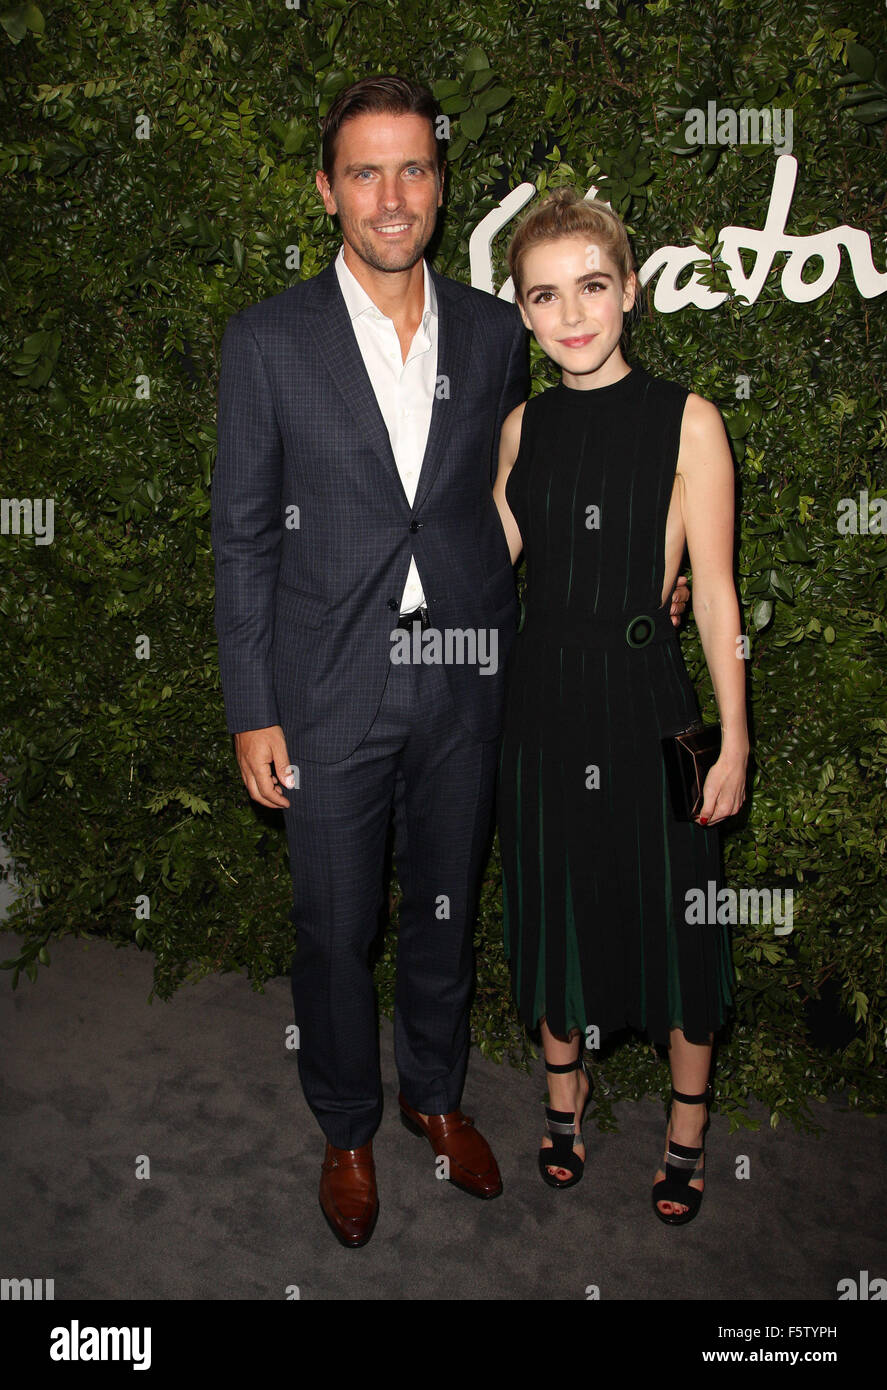 Celebrities attend the Salvatore Ferragamo 100 Years In Hollywood  celebration at the newly unveiled Rodeo Drive flagship Salvatore Ferragamo  boutique. Featuring: James Ferragamo, Kiernan Shipka Where: Los Angeles,  California, United States When: